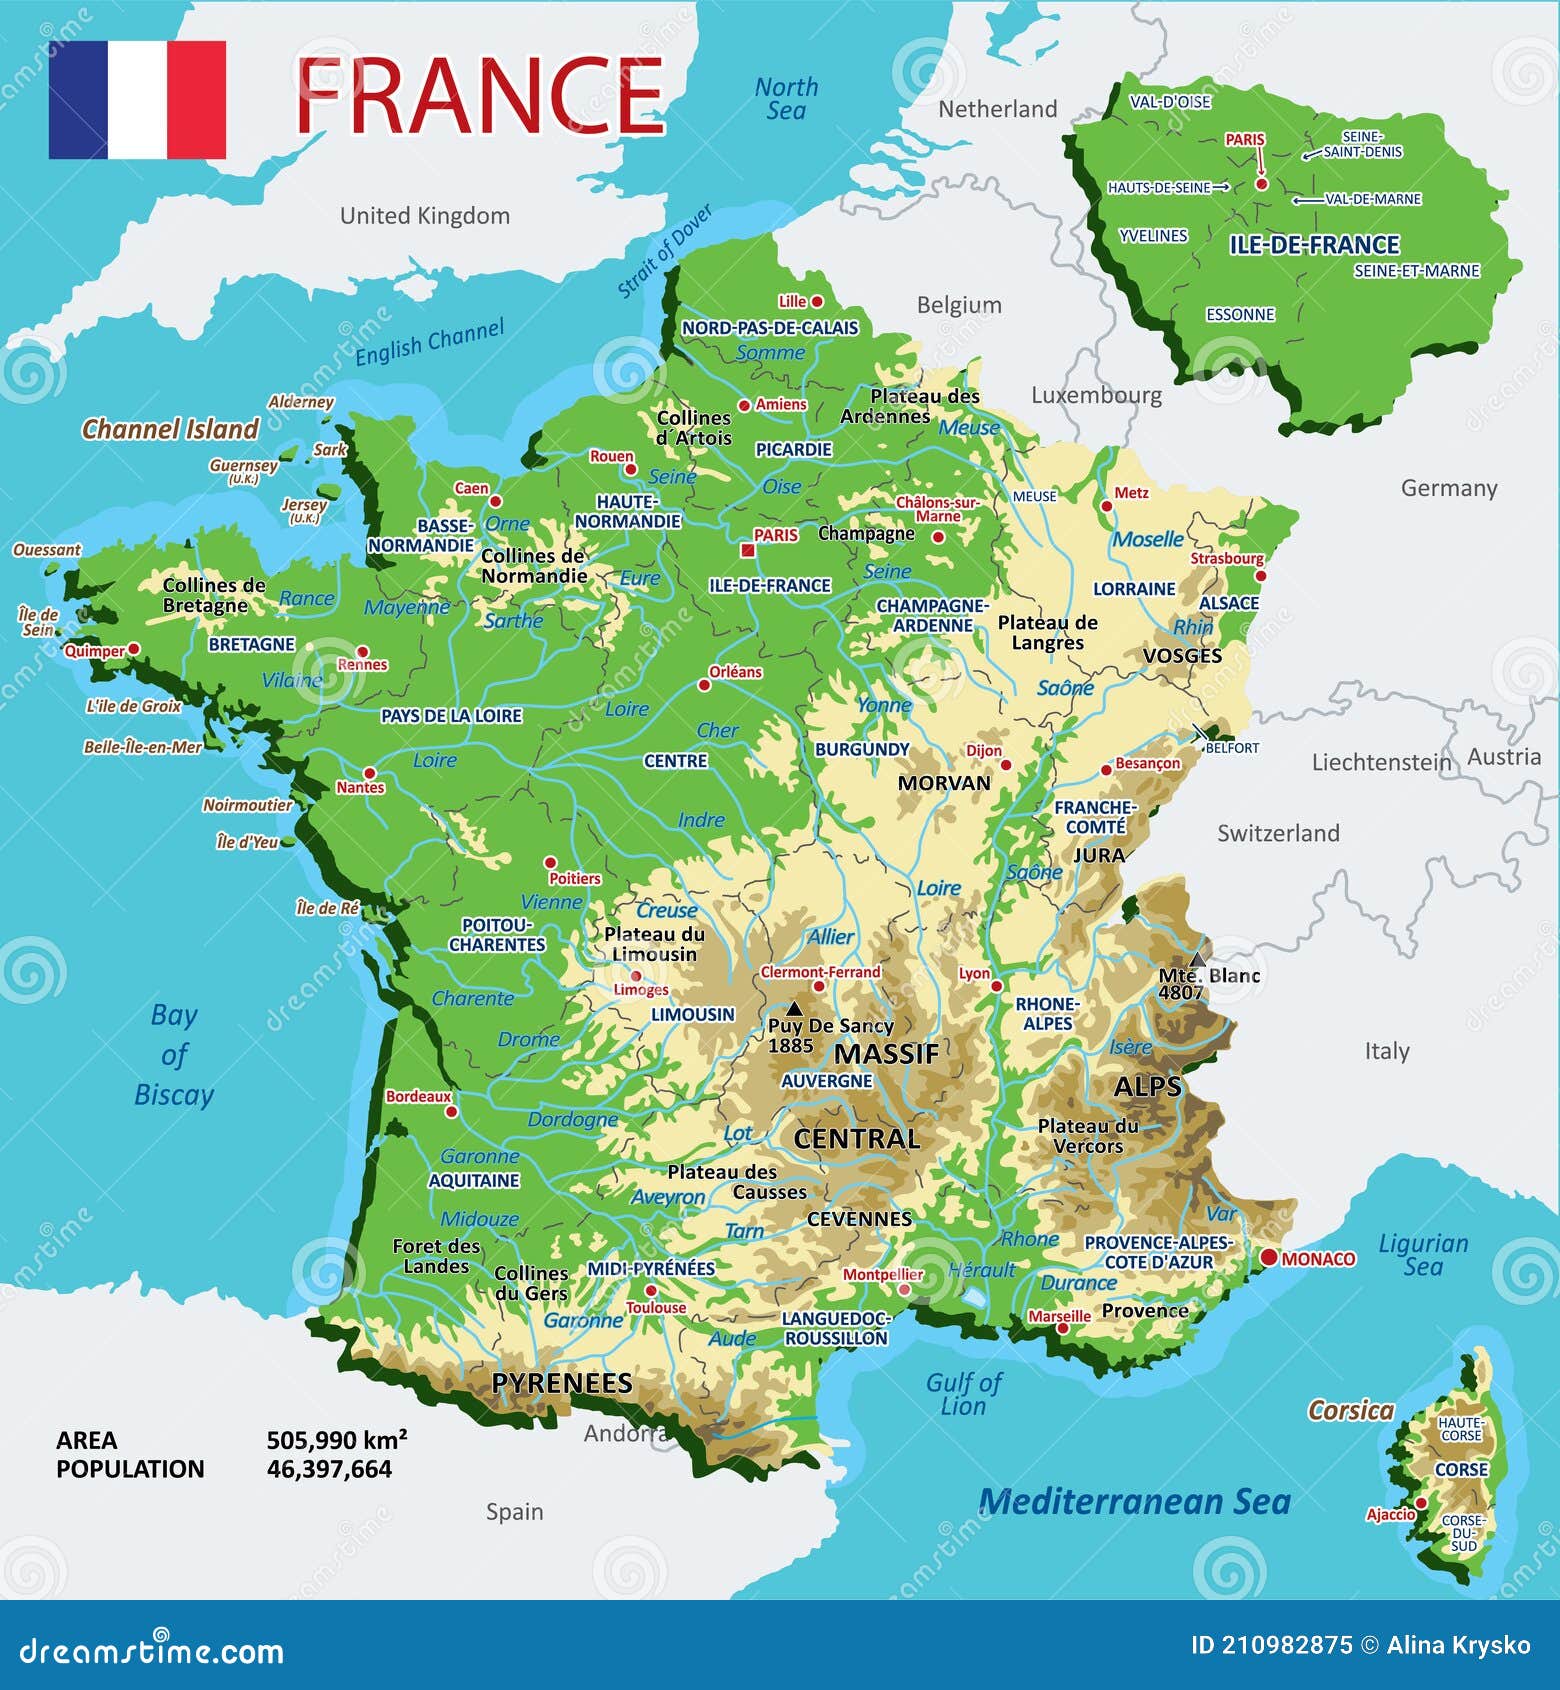 High Detailed Geogr Of France With Mountains Mountain Ranges And Plateaus Plains Lakes And Rivers Thorough France Physical Map Stock Vector Illustration Of National Label 210982875